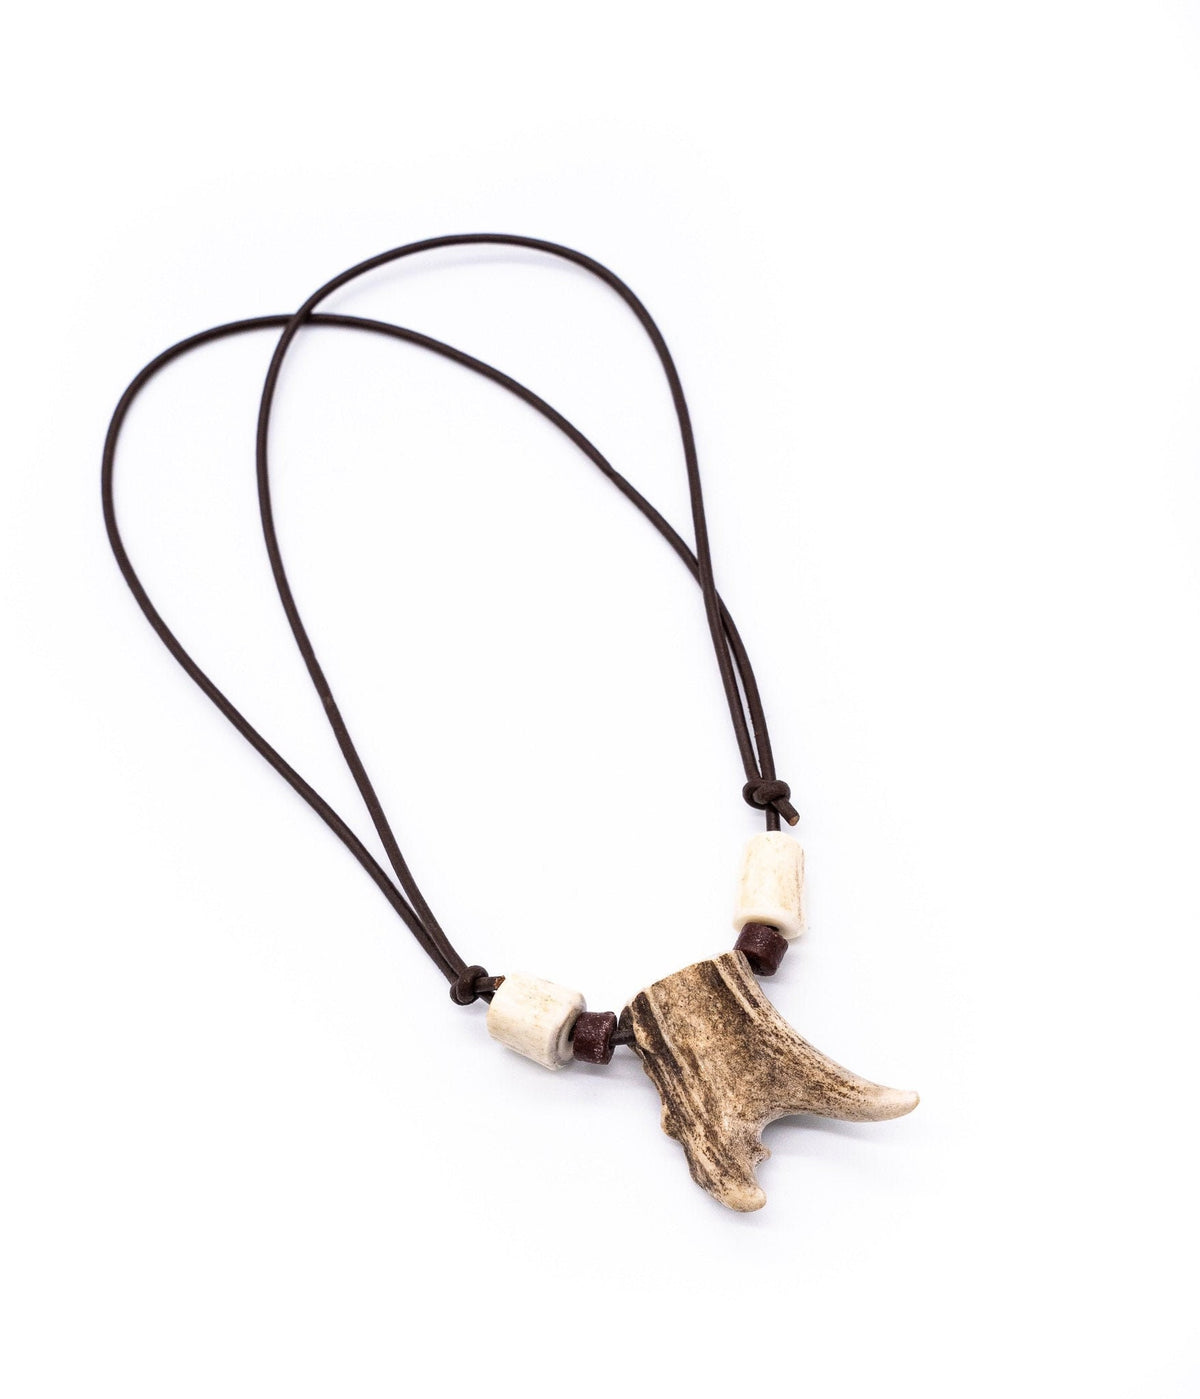 Deer Antler Fork Chain necklace w/ Leather and Antler Beads